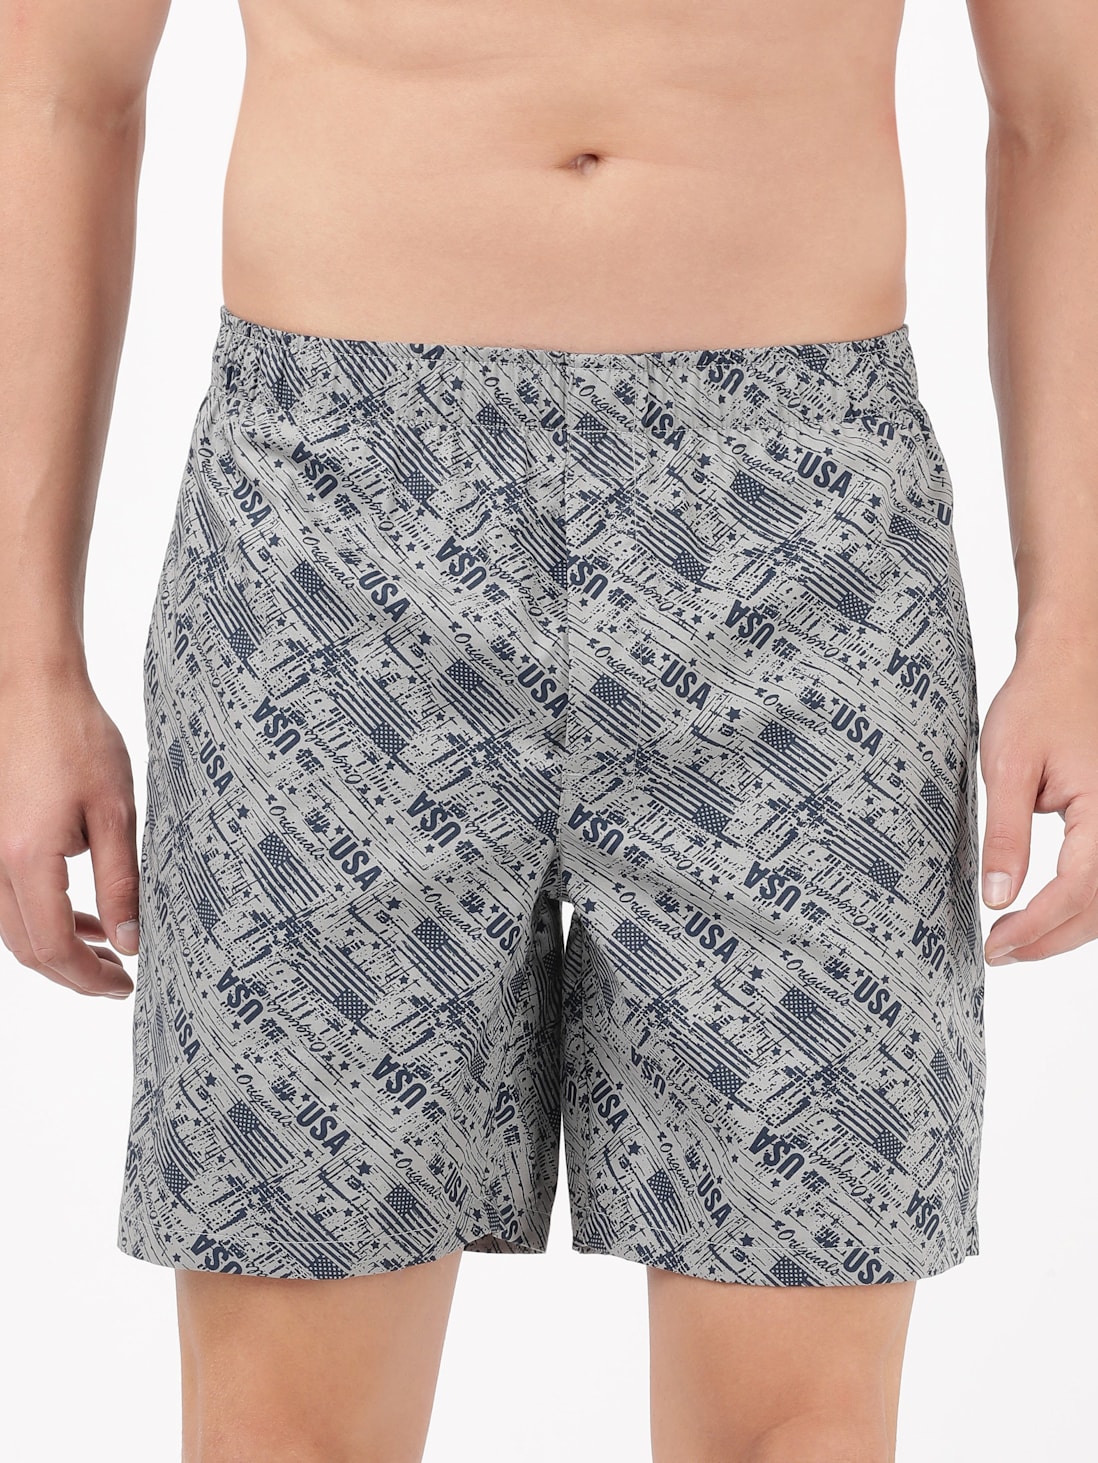 Buy Men's Super Combed Mercerized Cotton Woven Printed Boxer Shorts with  Side Pocket - Nickle US57